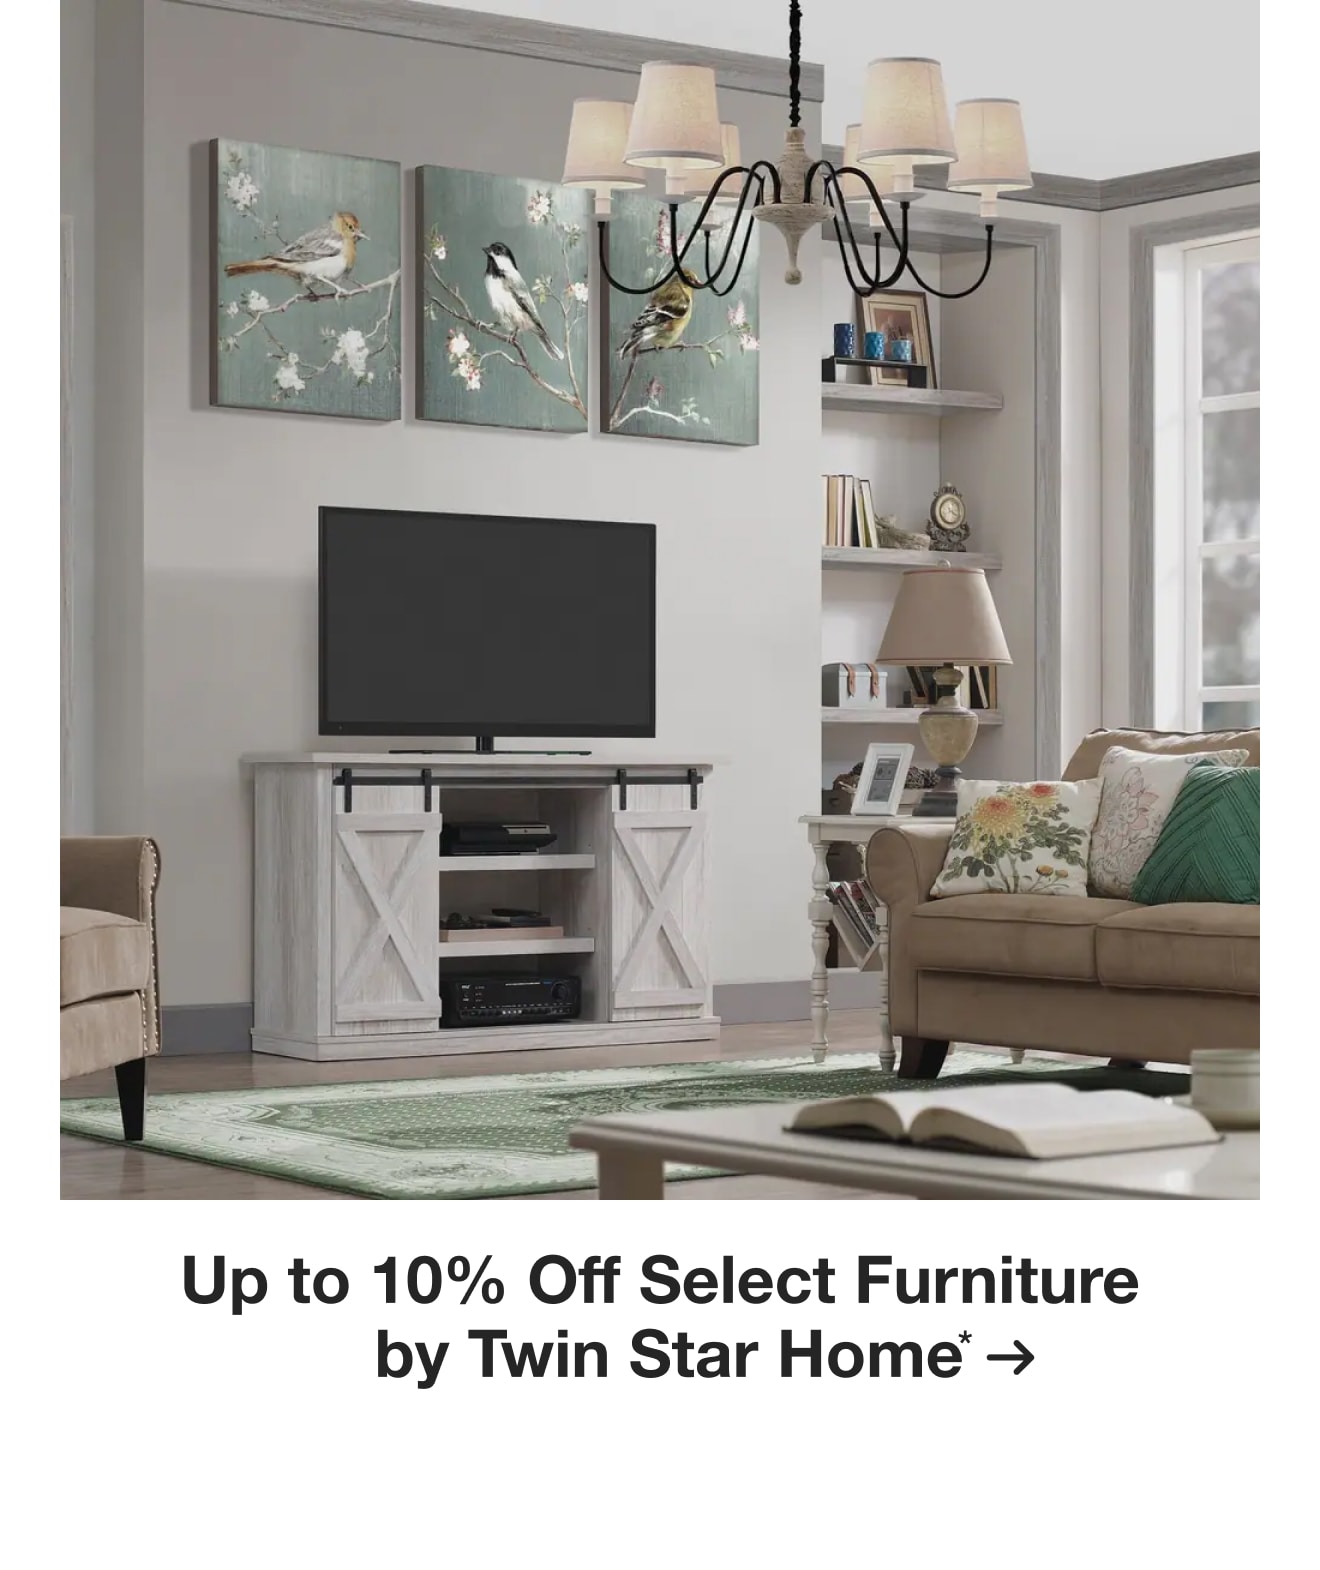 Up to 10% Off Select Furniture by Twin Star Home*